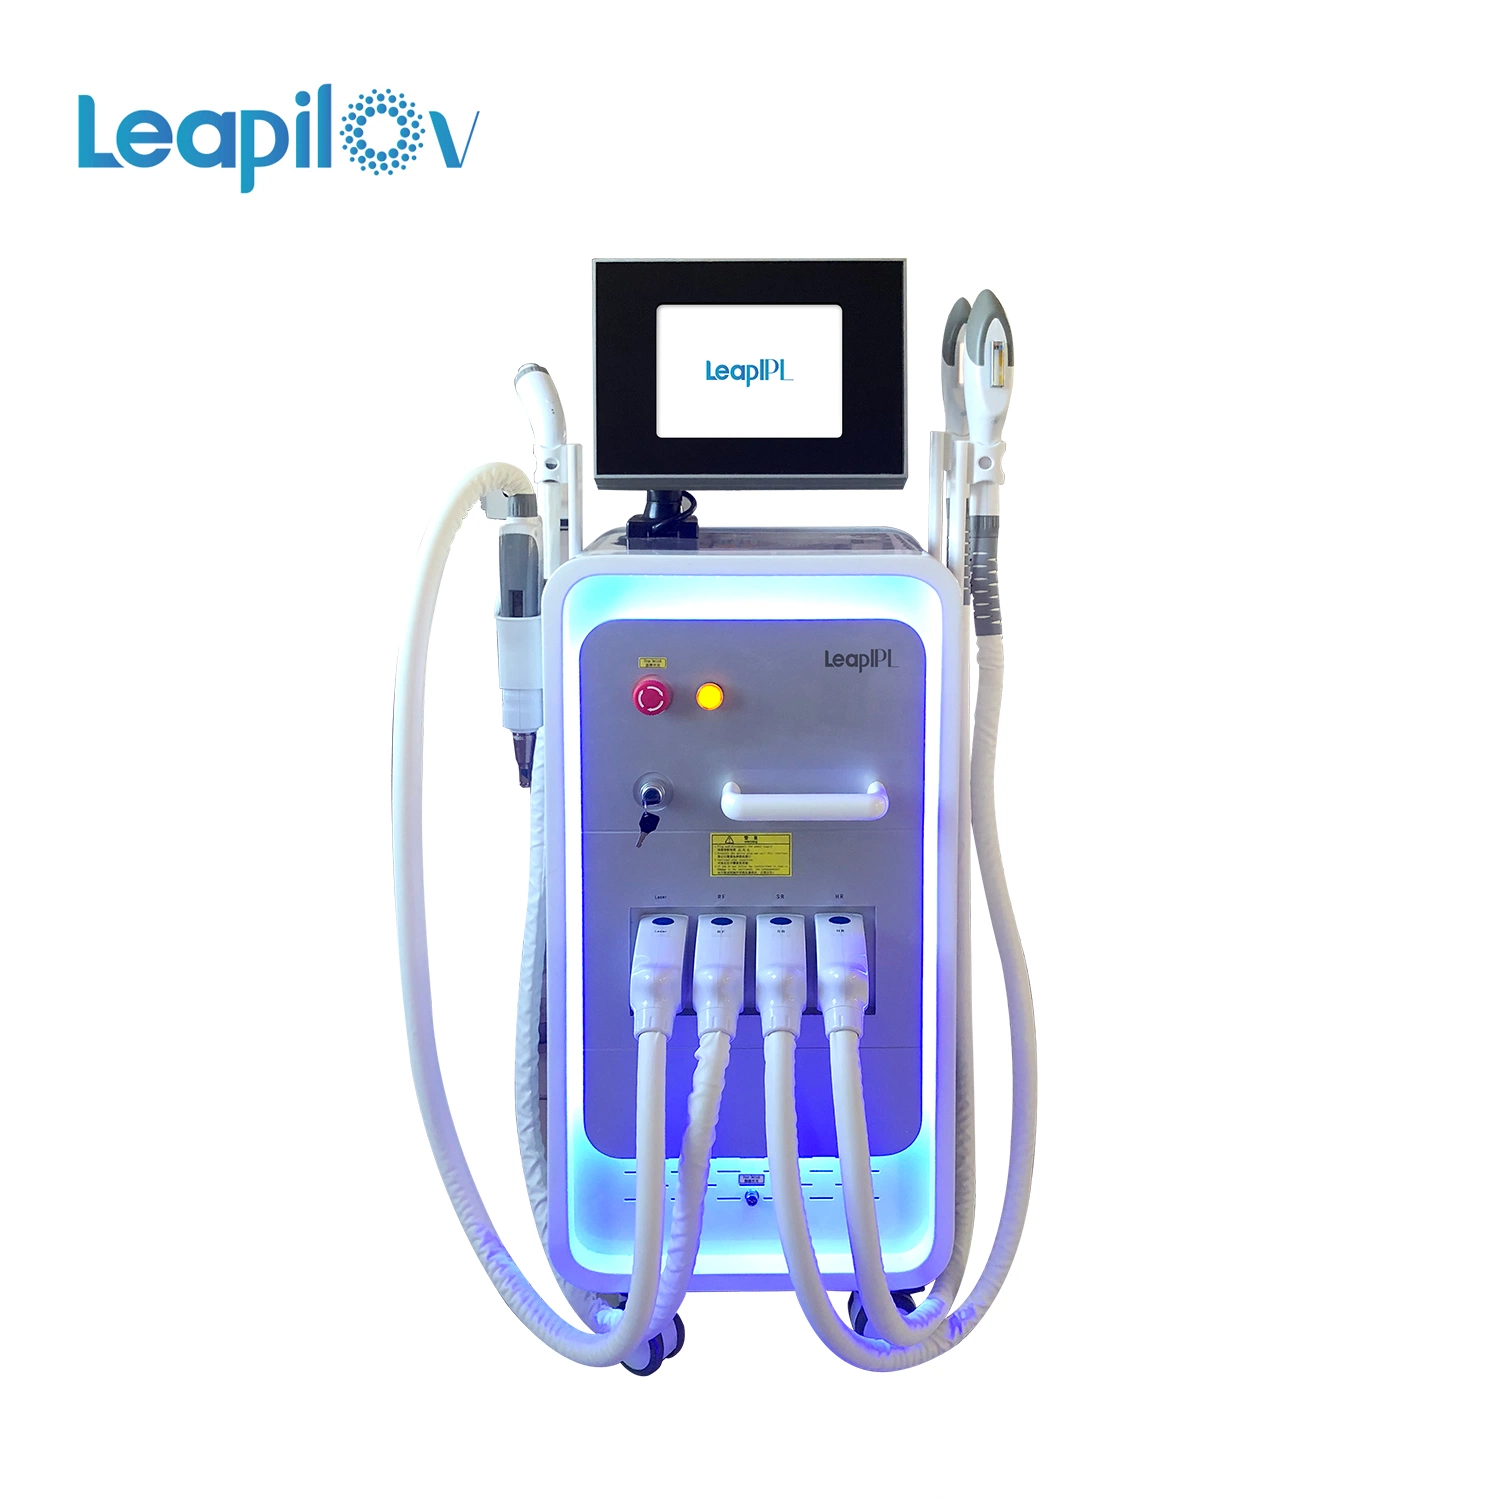 Multifunction 3 in 1 Opt + IPL+ RF+ ND YAG Permanent Laser Tattoo Removal Hair Removal Skin Rejuvenation